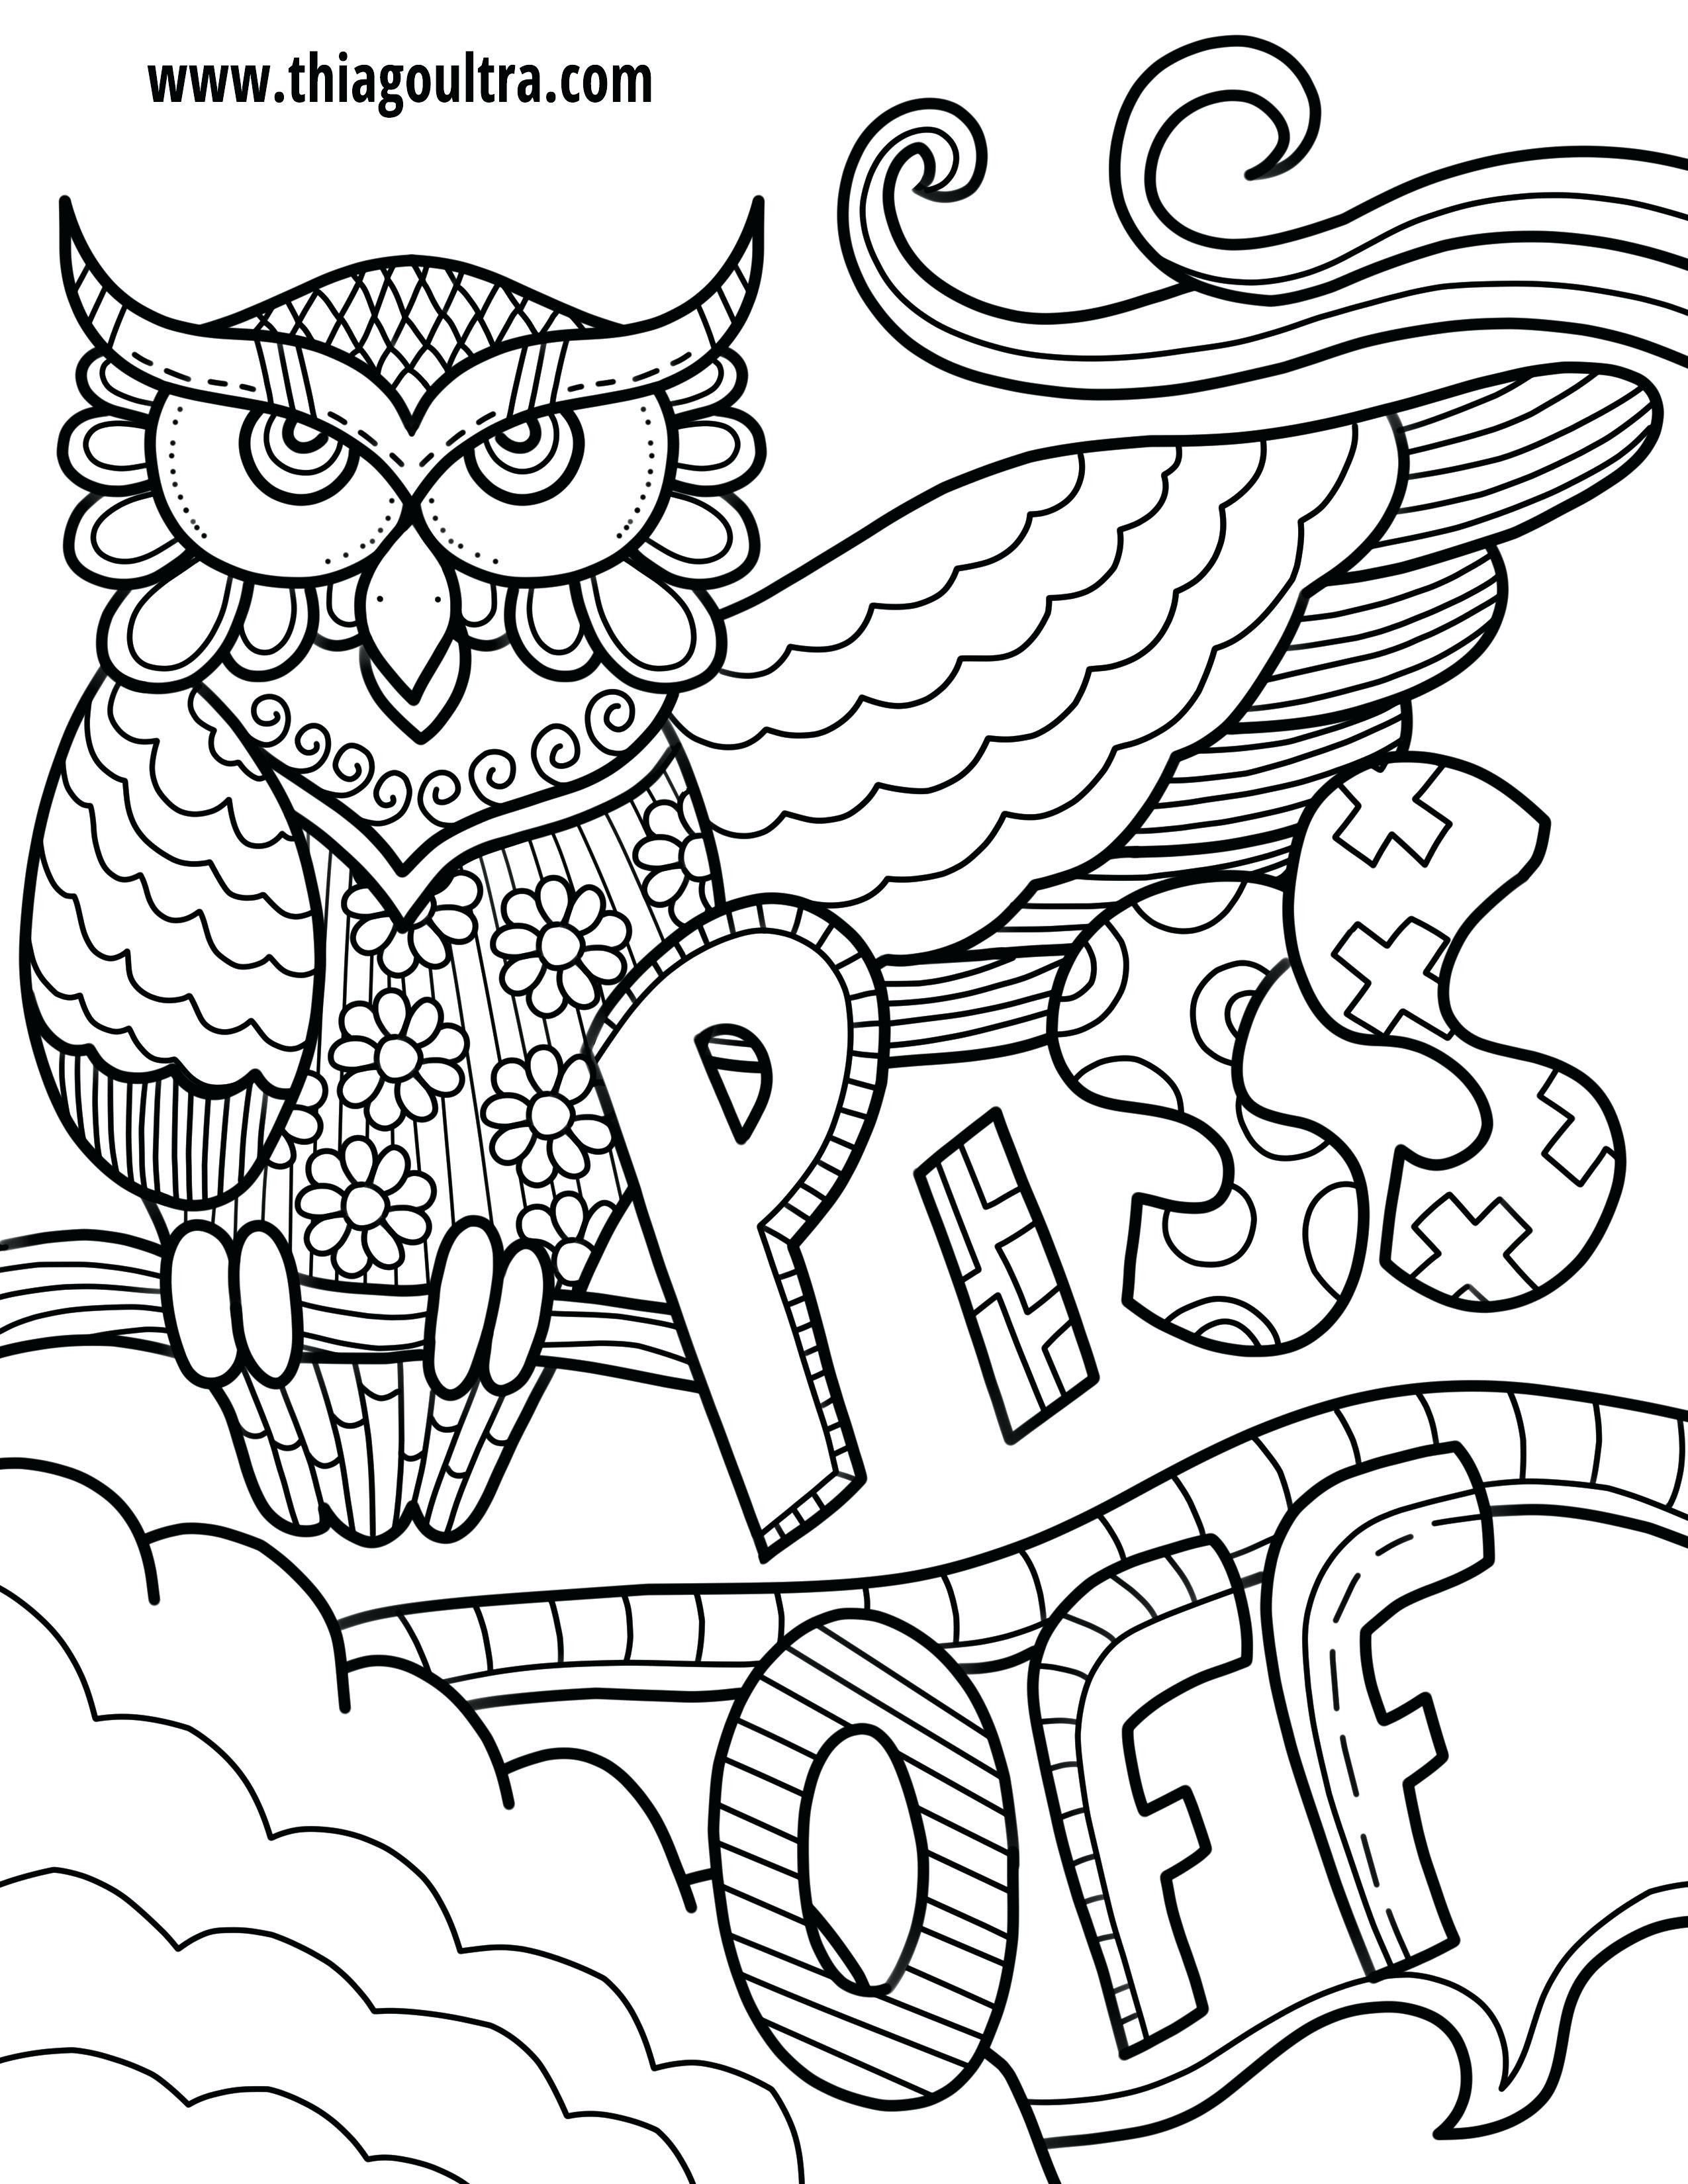 Thanksgiving Design Word Coloring Pages For Teens
 Free Coloring Pages For Kids